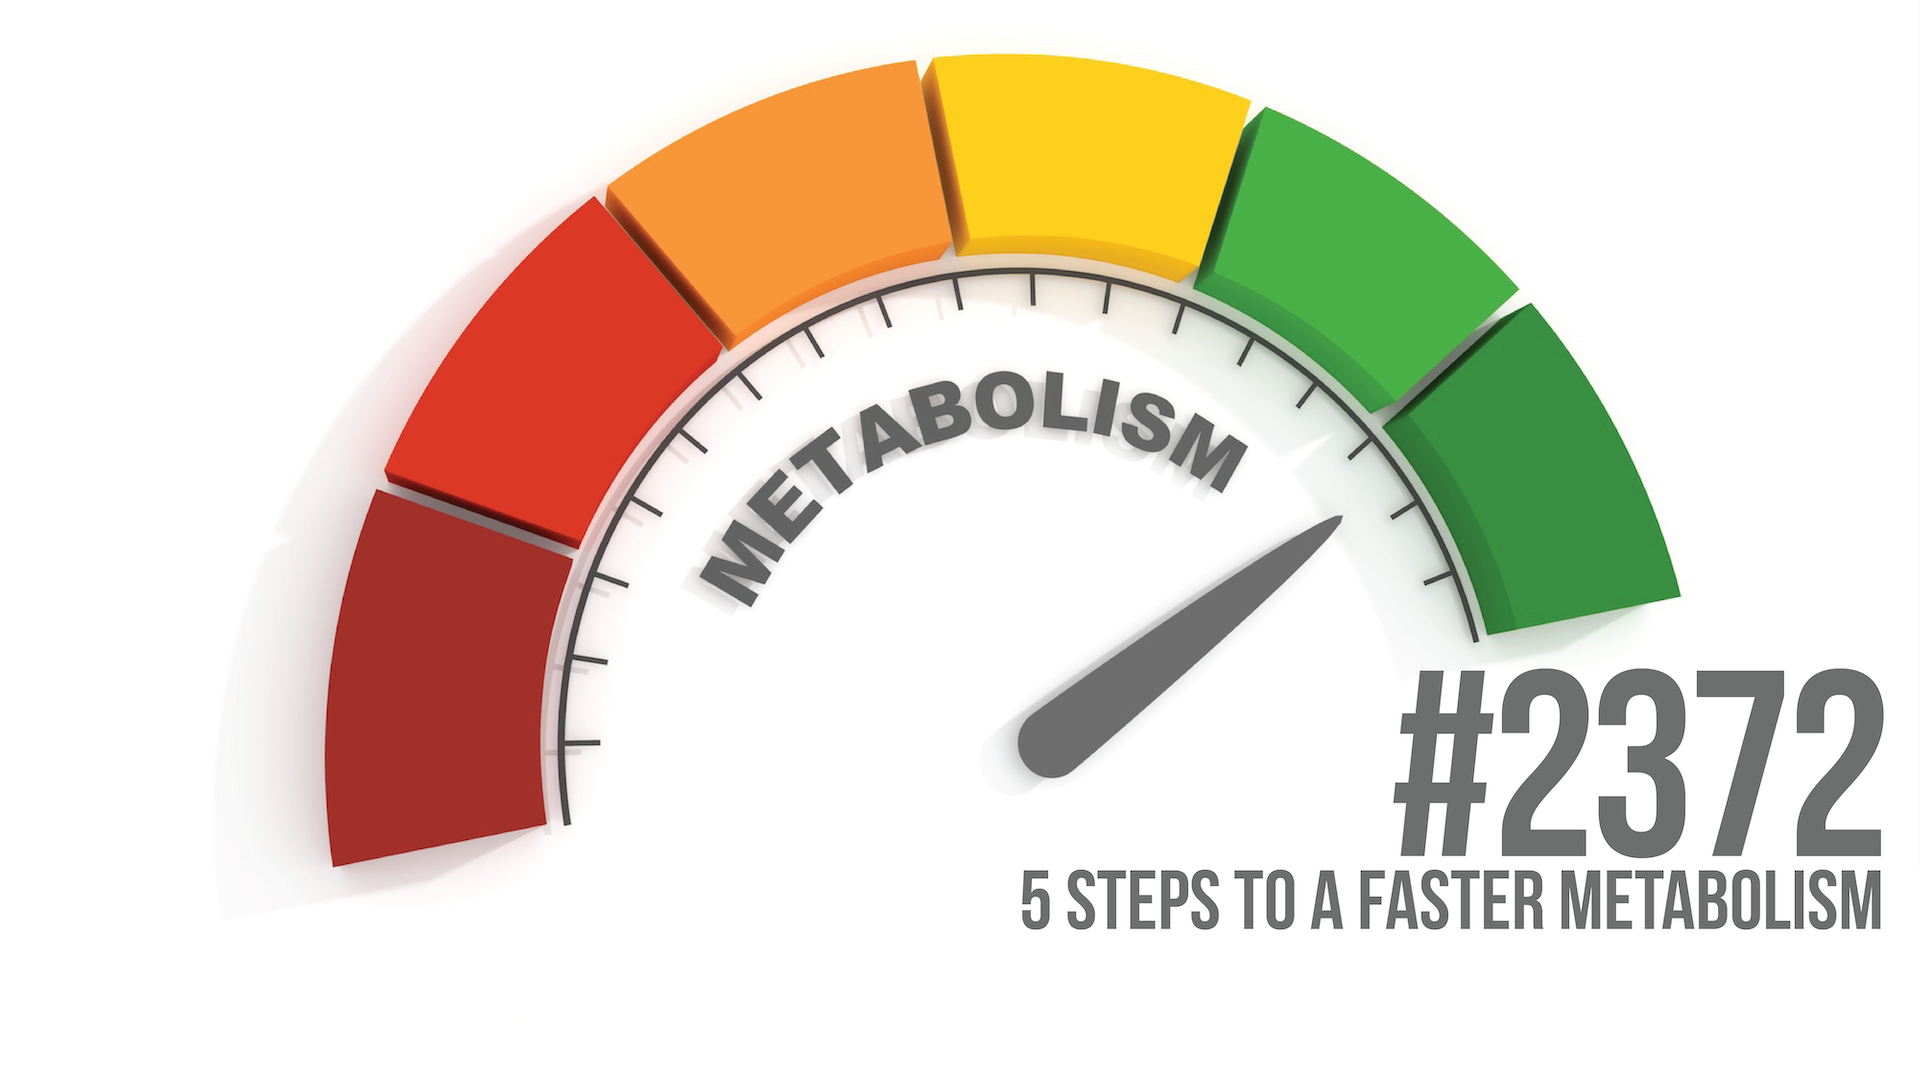 2372: Five Steps to a Faster Metabolism